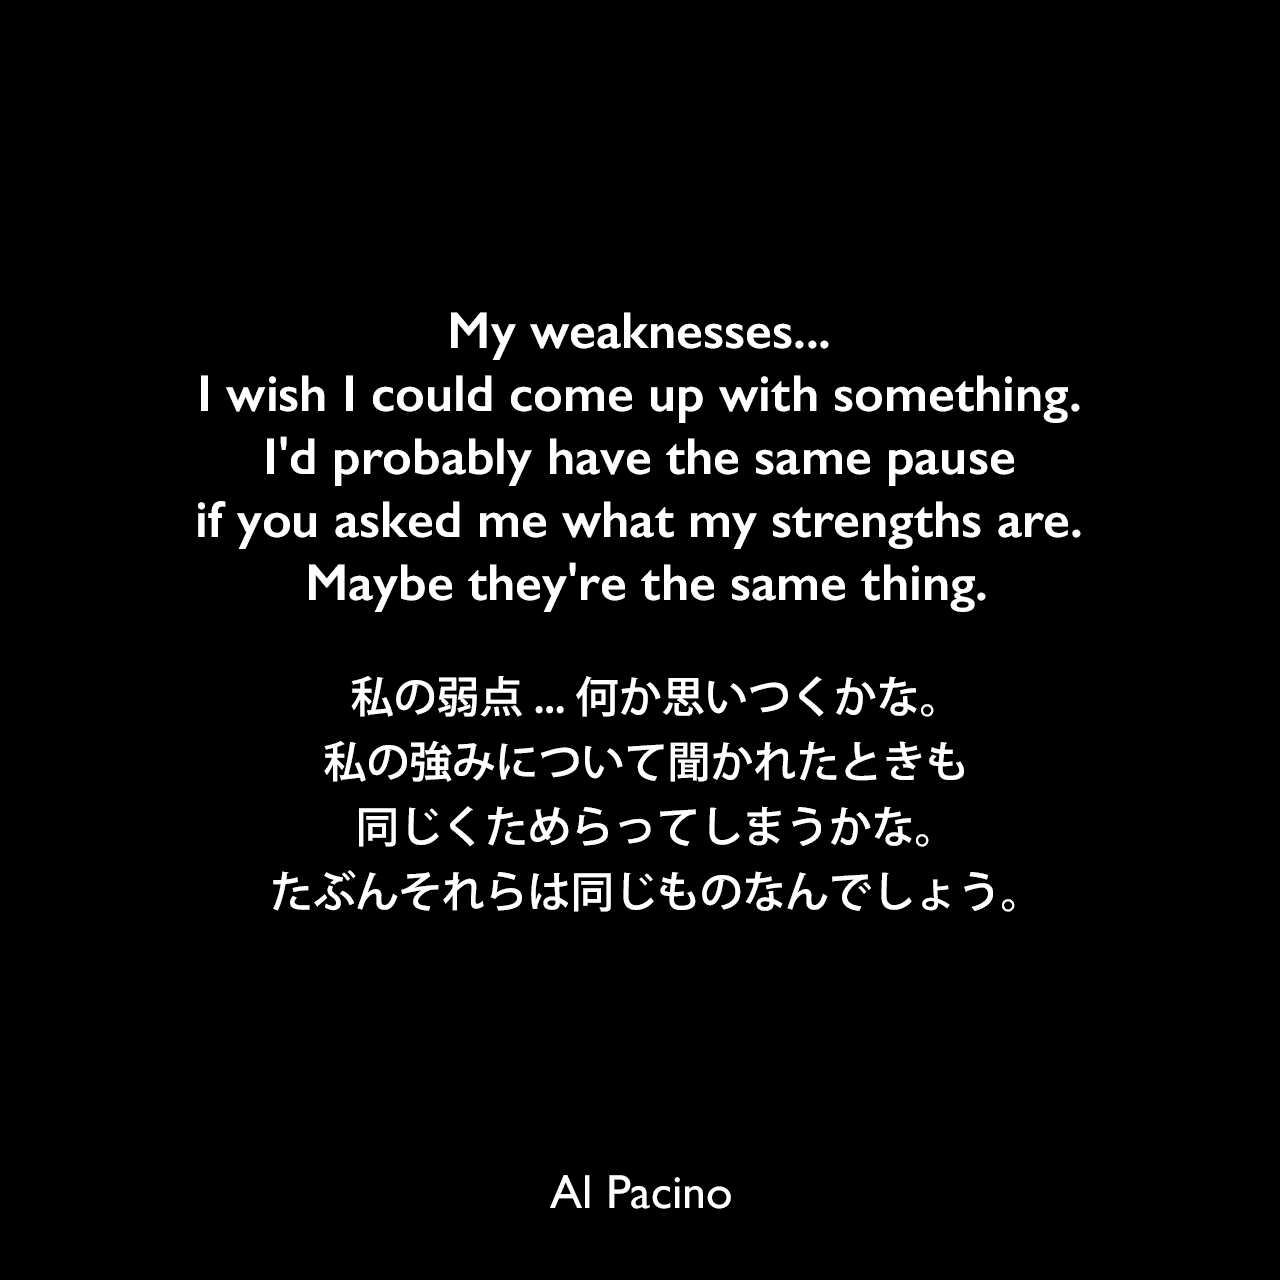 My weaknesses... I wish I could come up with something. I'd probably have the same pause if you asked me what my strengths are. Maybe they're the same thing.私の弱点...何か思いつくかな。私の強みについて聞かれたときも同じくためらってしまうかな。たぶんそれらは同じものなんでしょう。Al Pacino